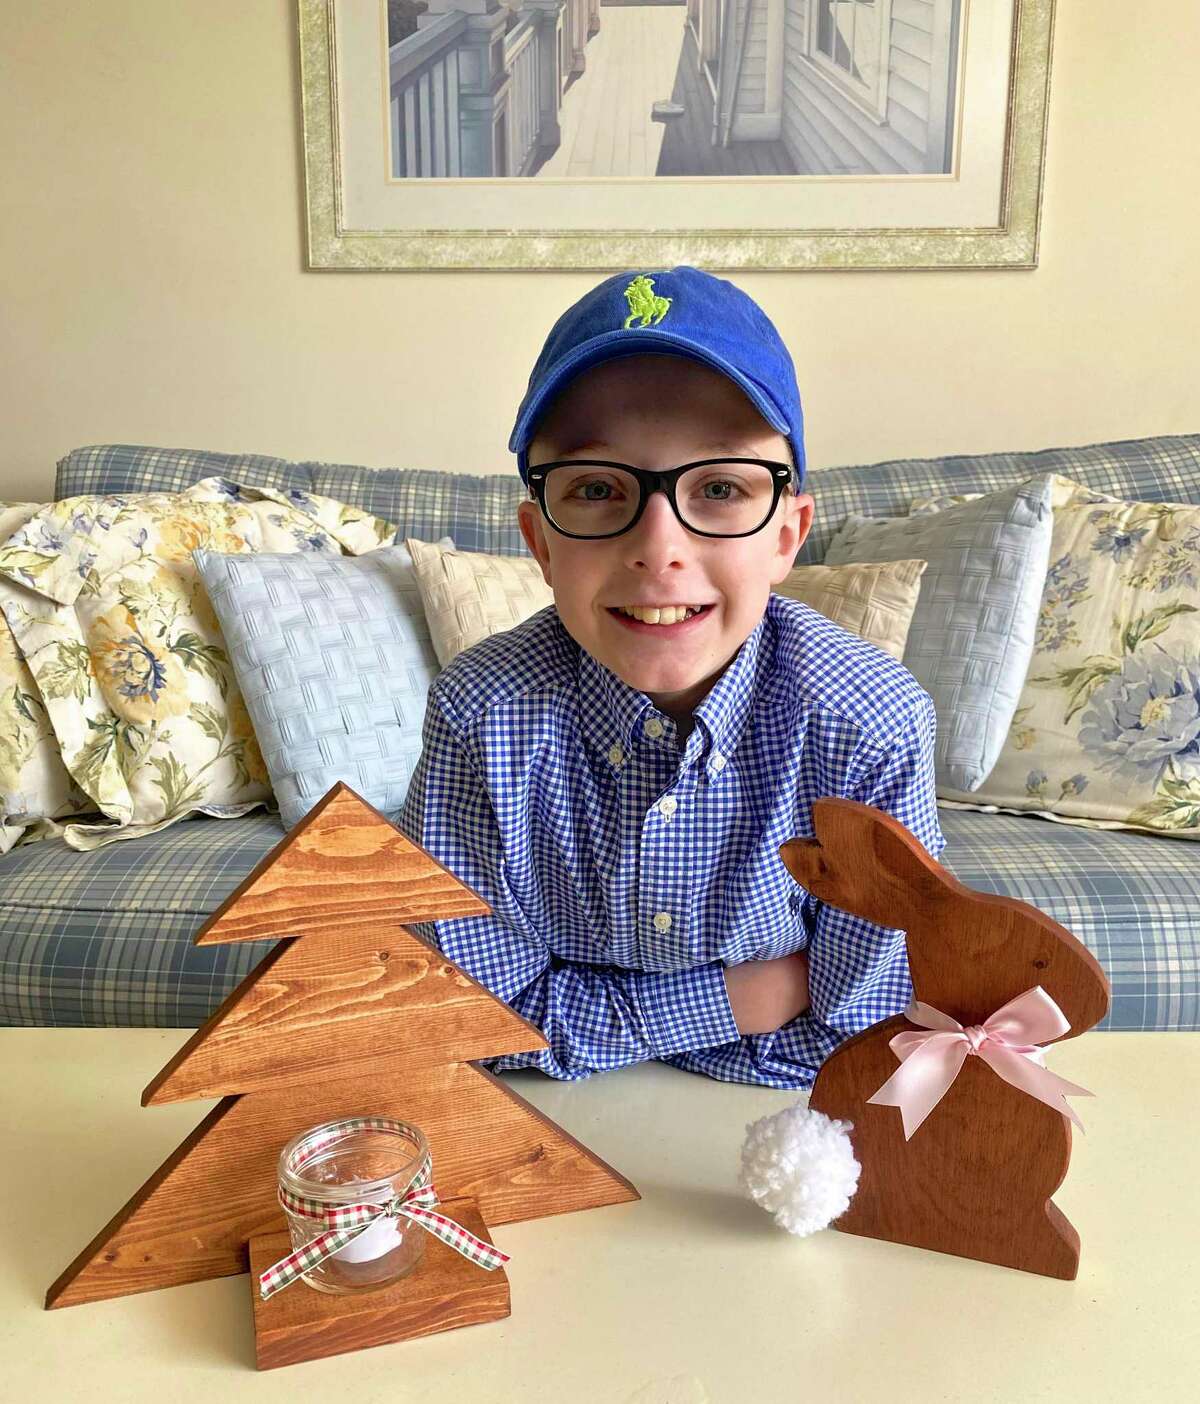 Frankie DeMunda, a Danbury 12-year-old, creates and sells wooden items, with a portion of the proceeds going towards causes, including providing meals to workers at Danbury Hospital.